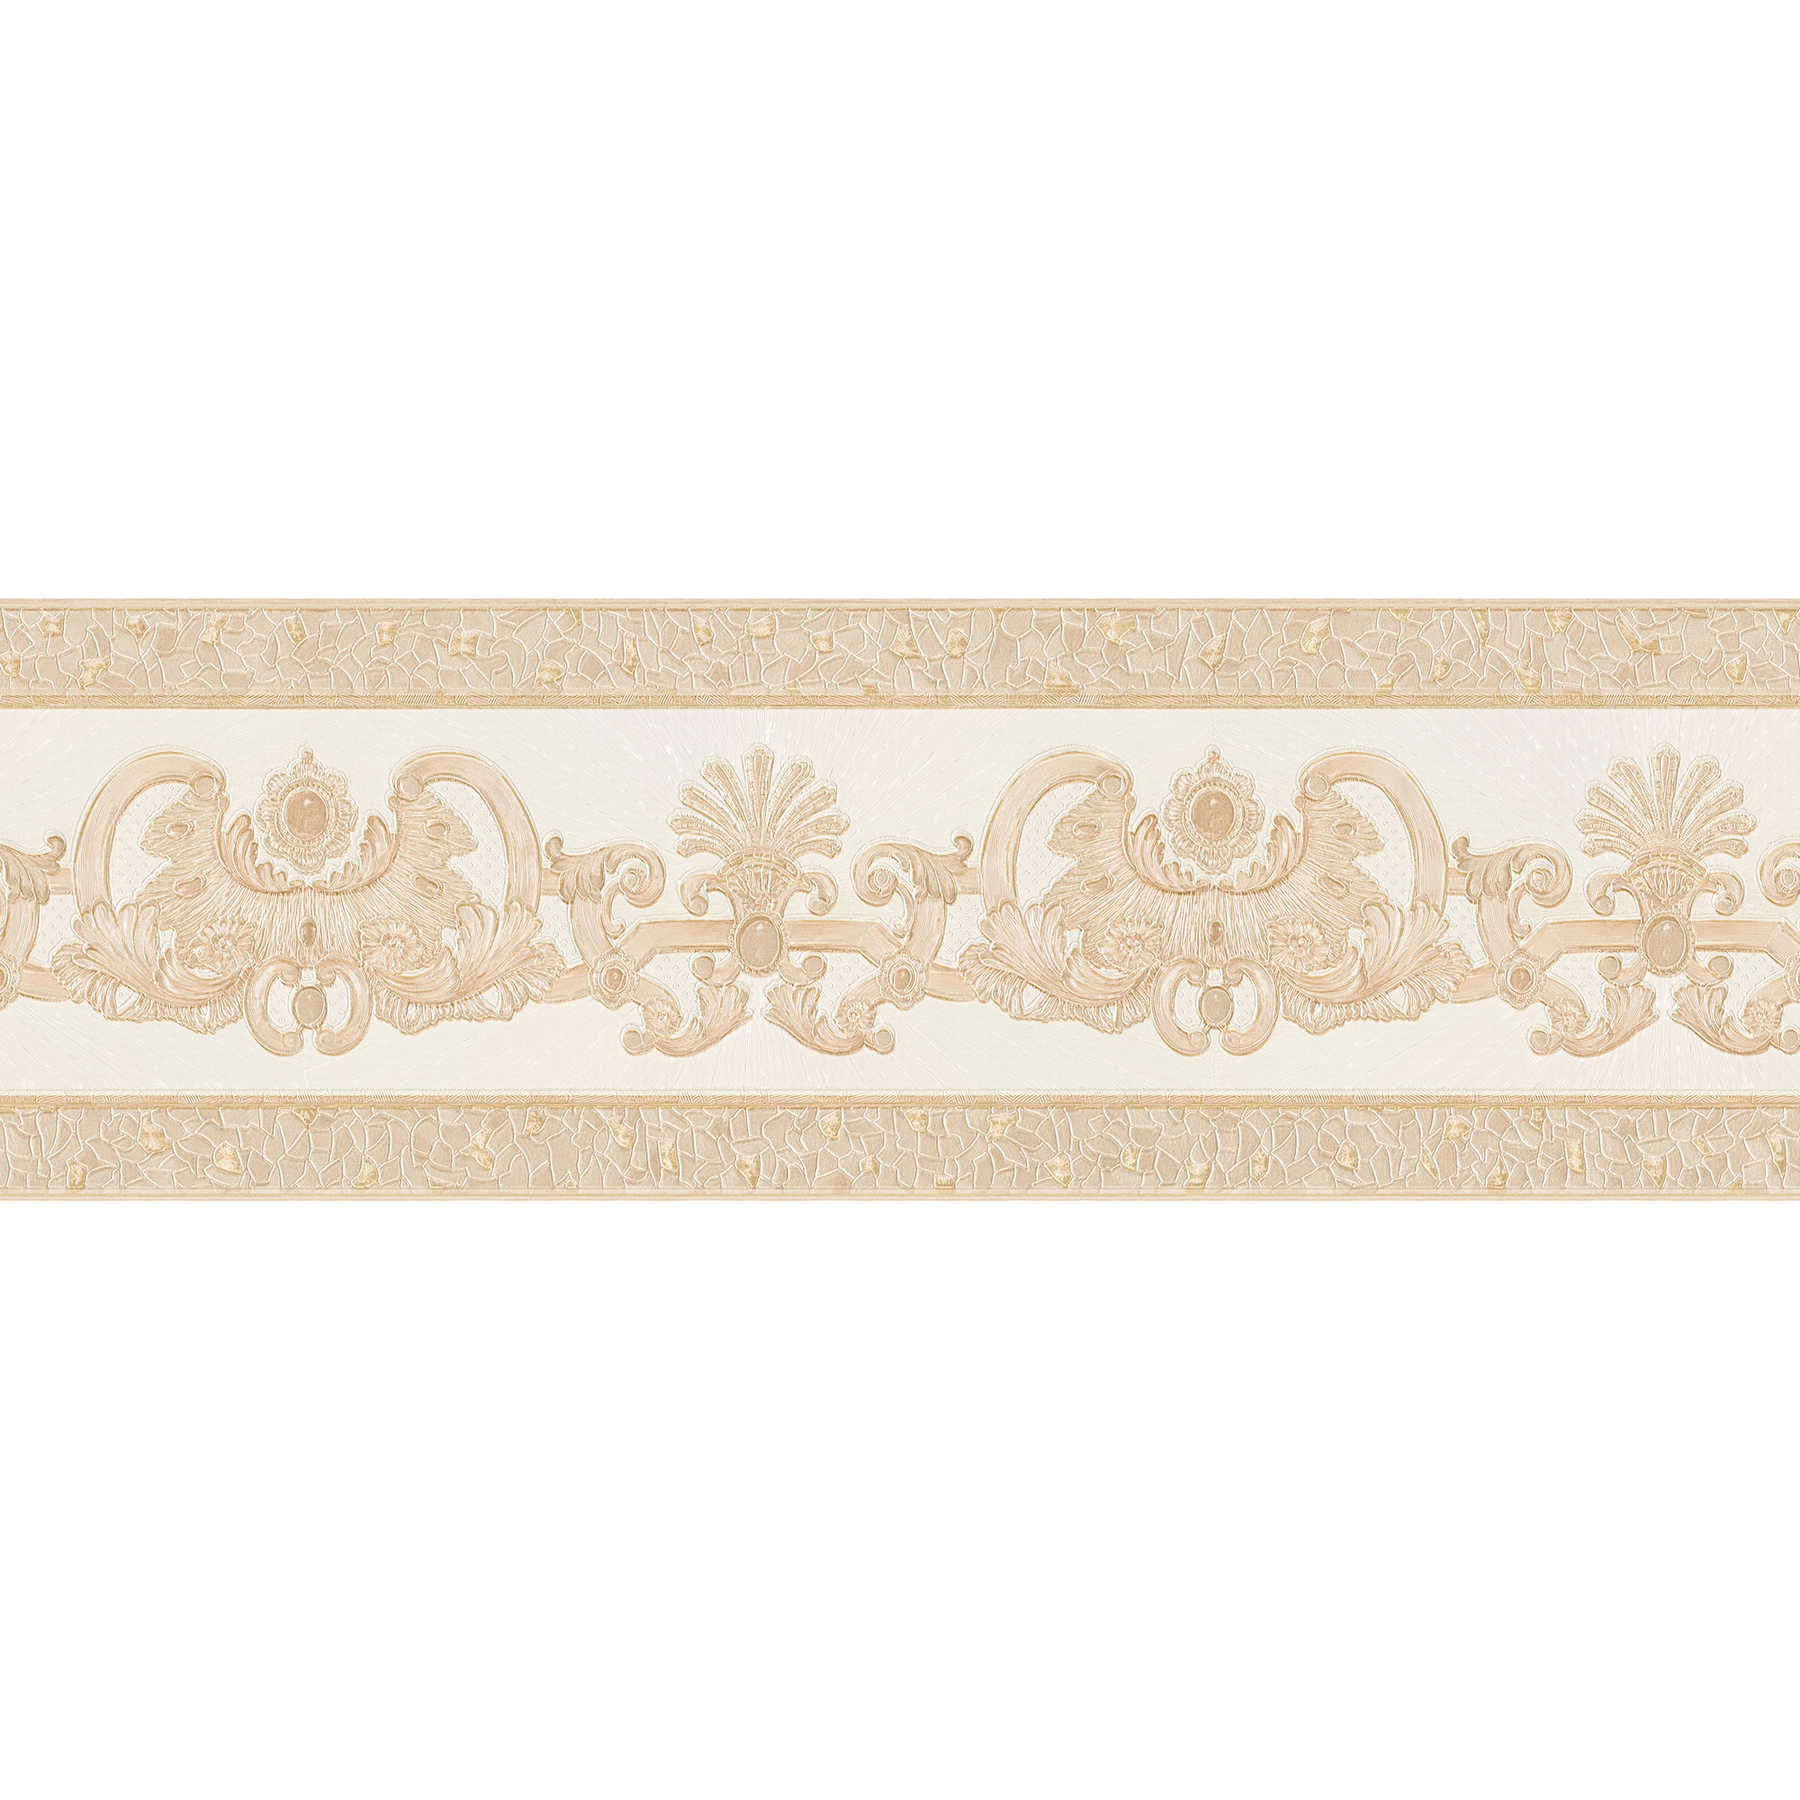         Wallpaper border with gold ornament & mosaic pattern
    